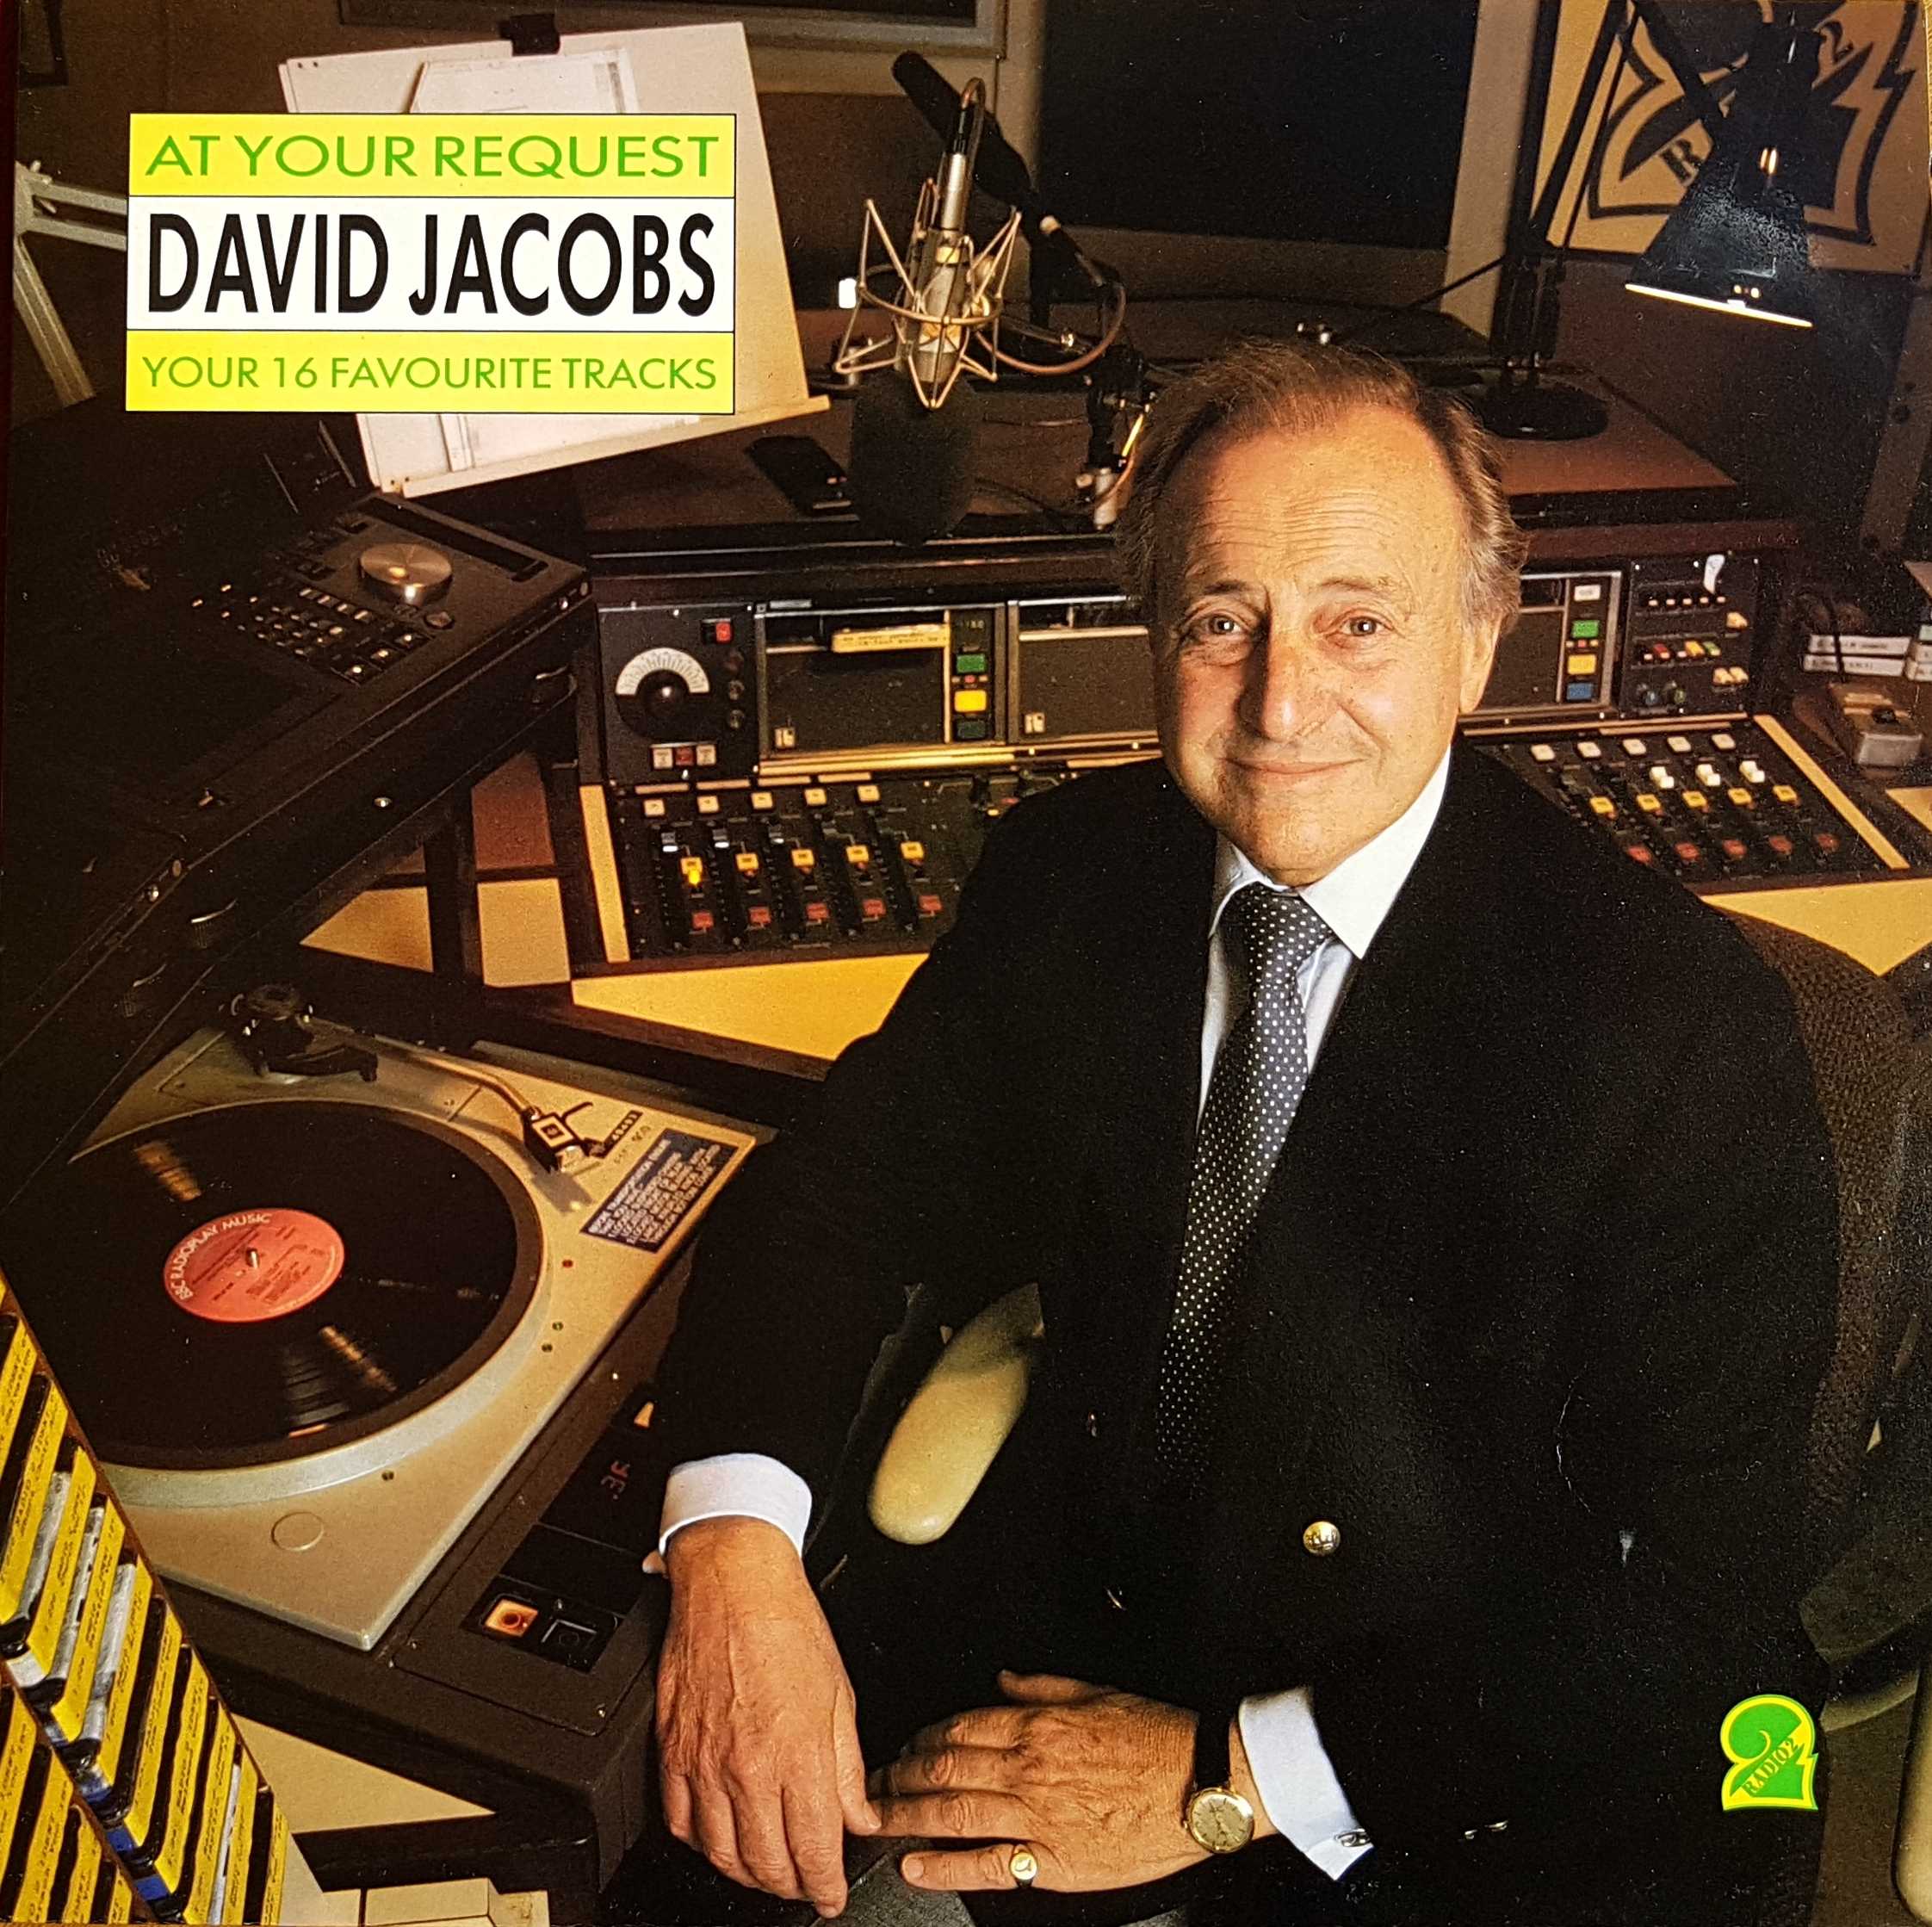 Picture of REN 711 At your request - David Jacobs by artist Various from the BBC albums - Records and Tapes library